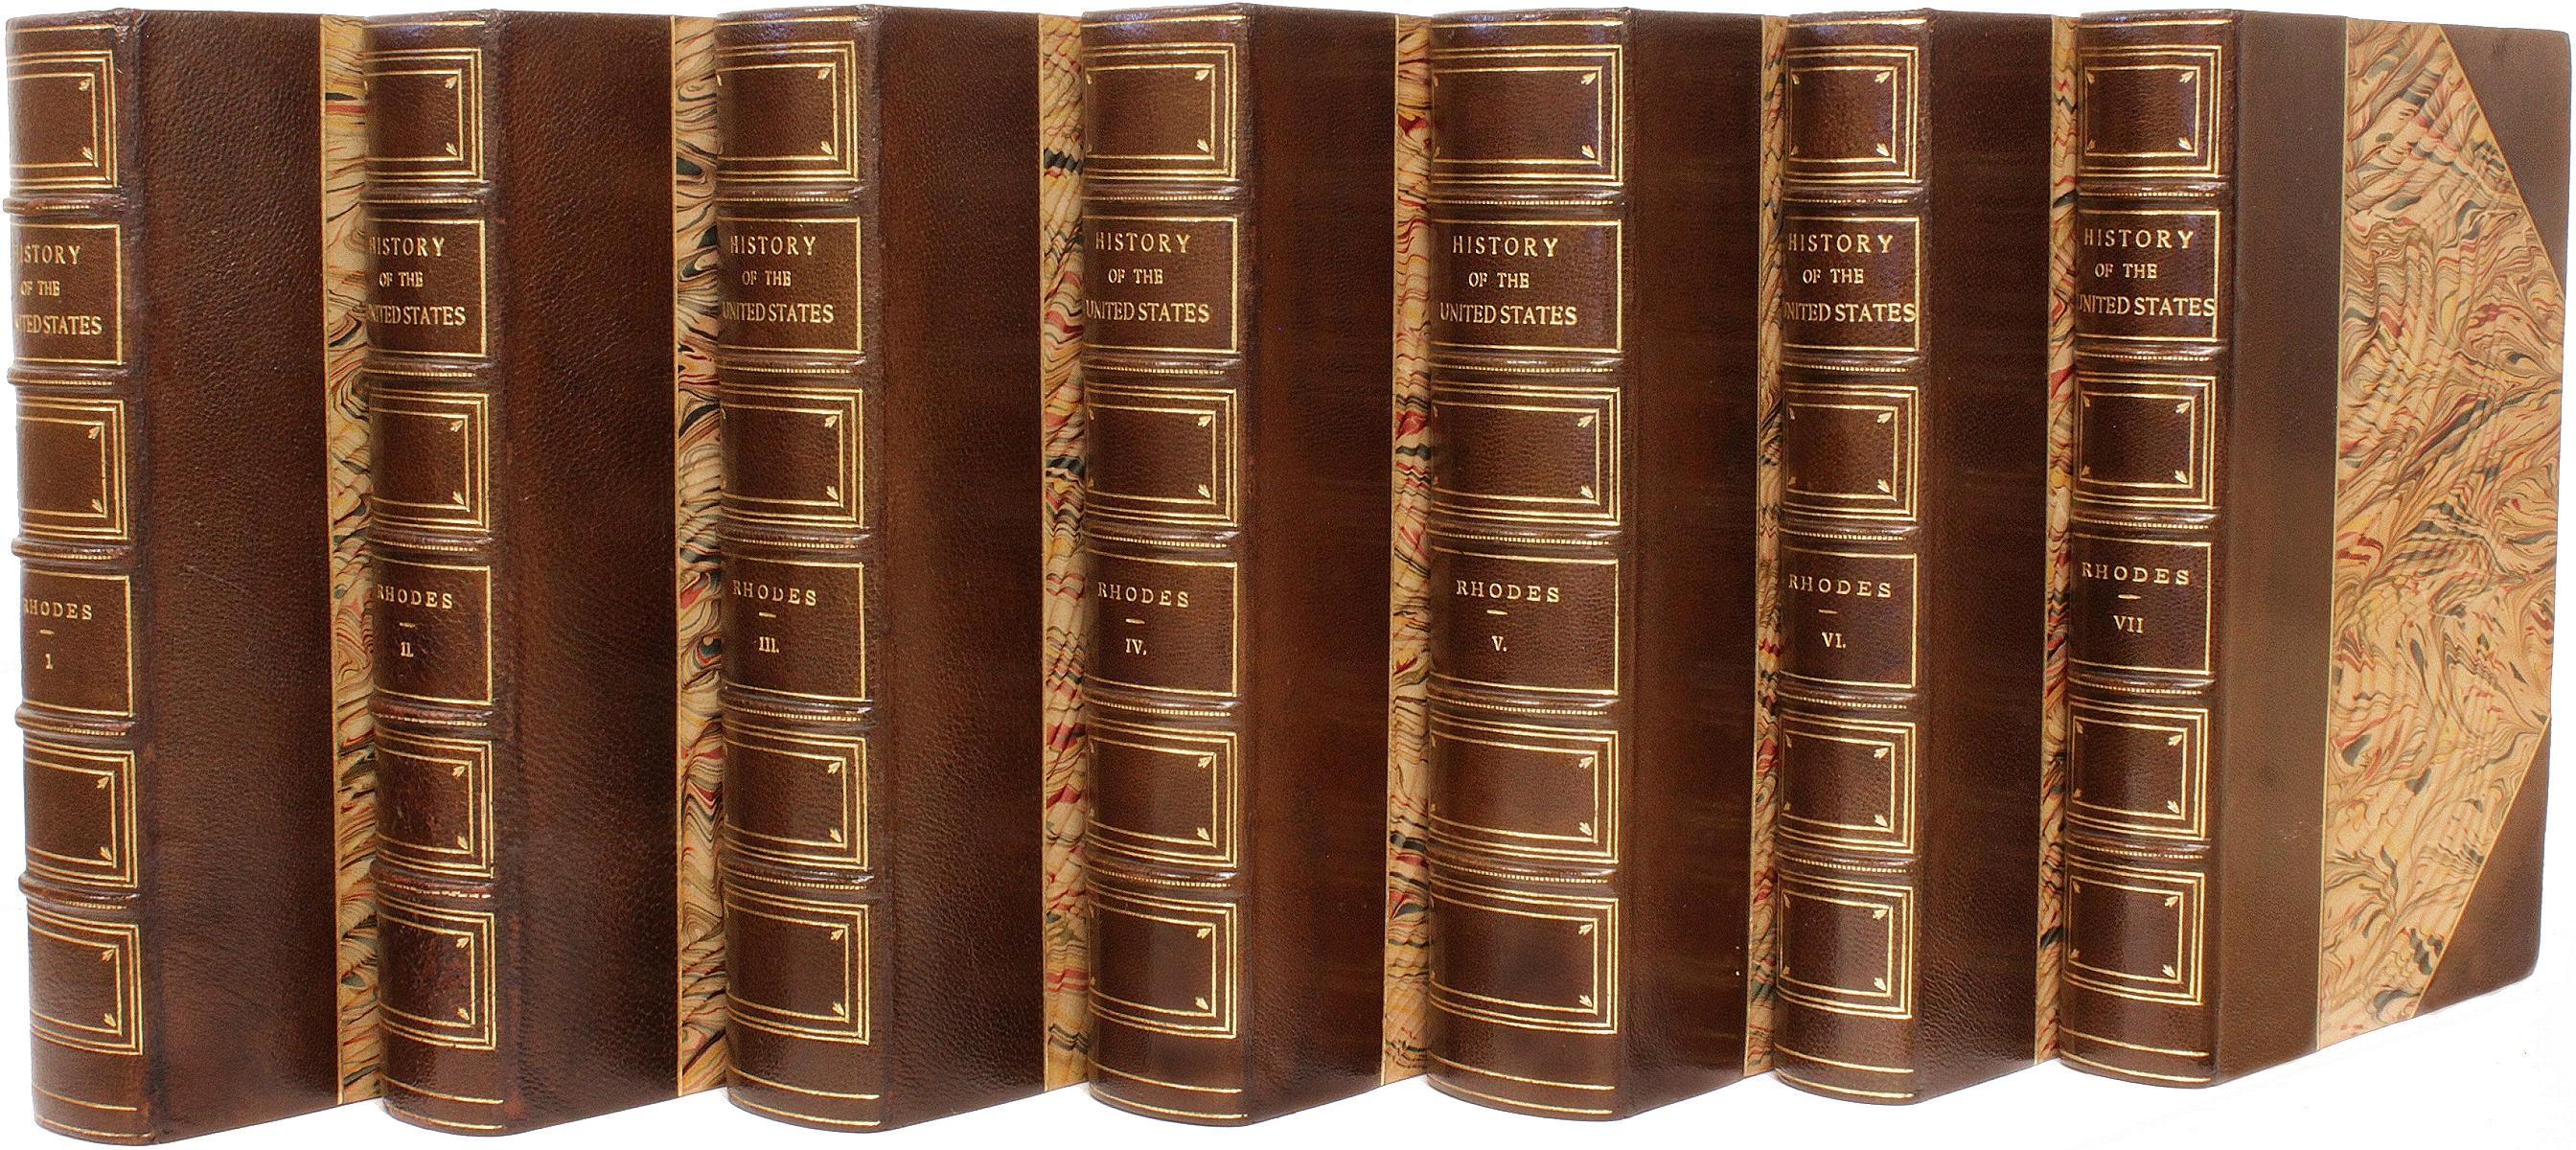 AUTHOR: RHODES, James Ford. 

TITLE: History Of The United States From The Compromise of 1850 To The Final Restoration Of Home Rule At The South In 1877.

PUBLISHER: NY: The Macmillan Company, 1910.

DESCRIPTION: 7 vols, 8-11/16